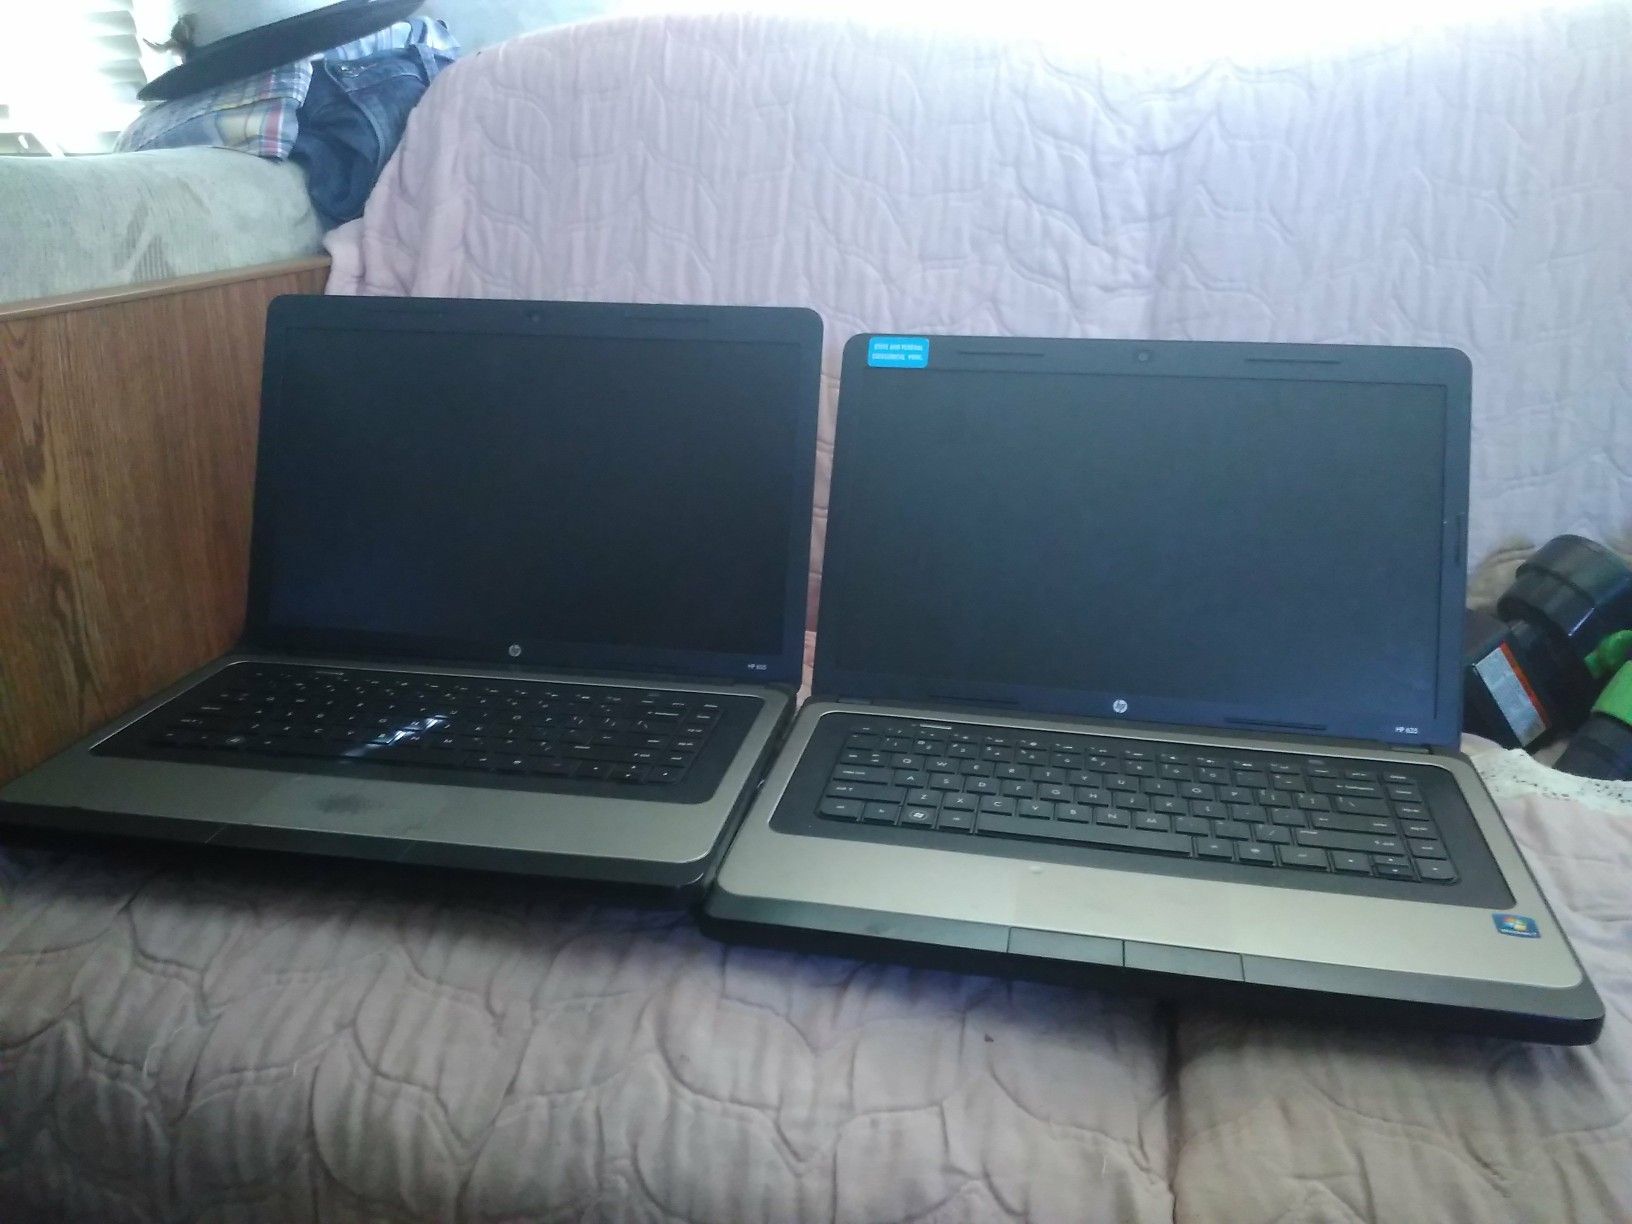 2 hp laptops both work missing covers